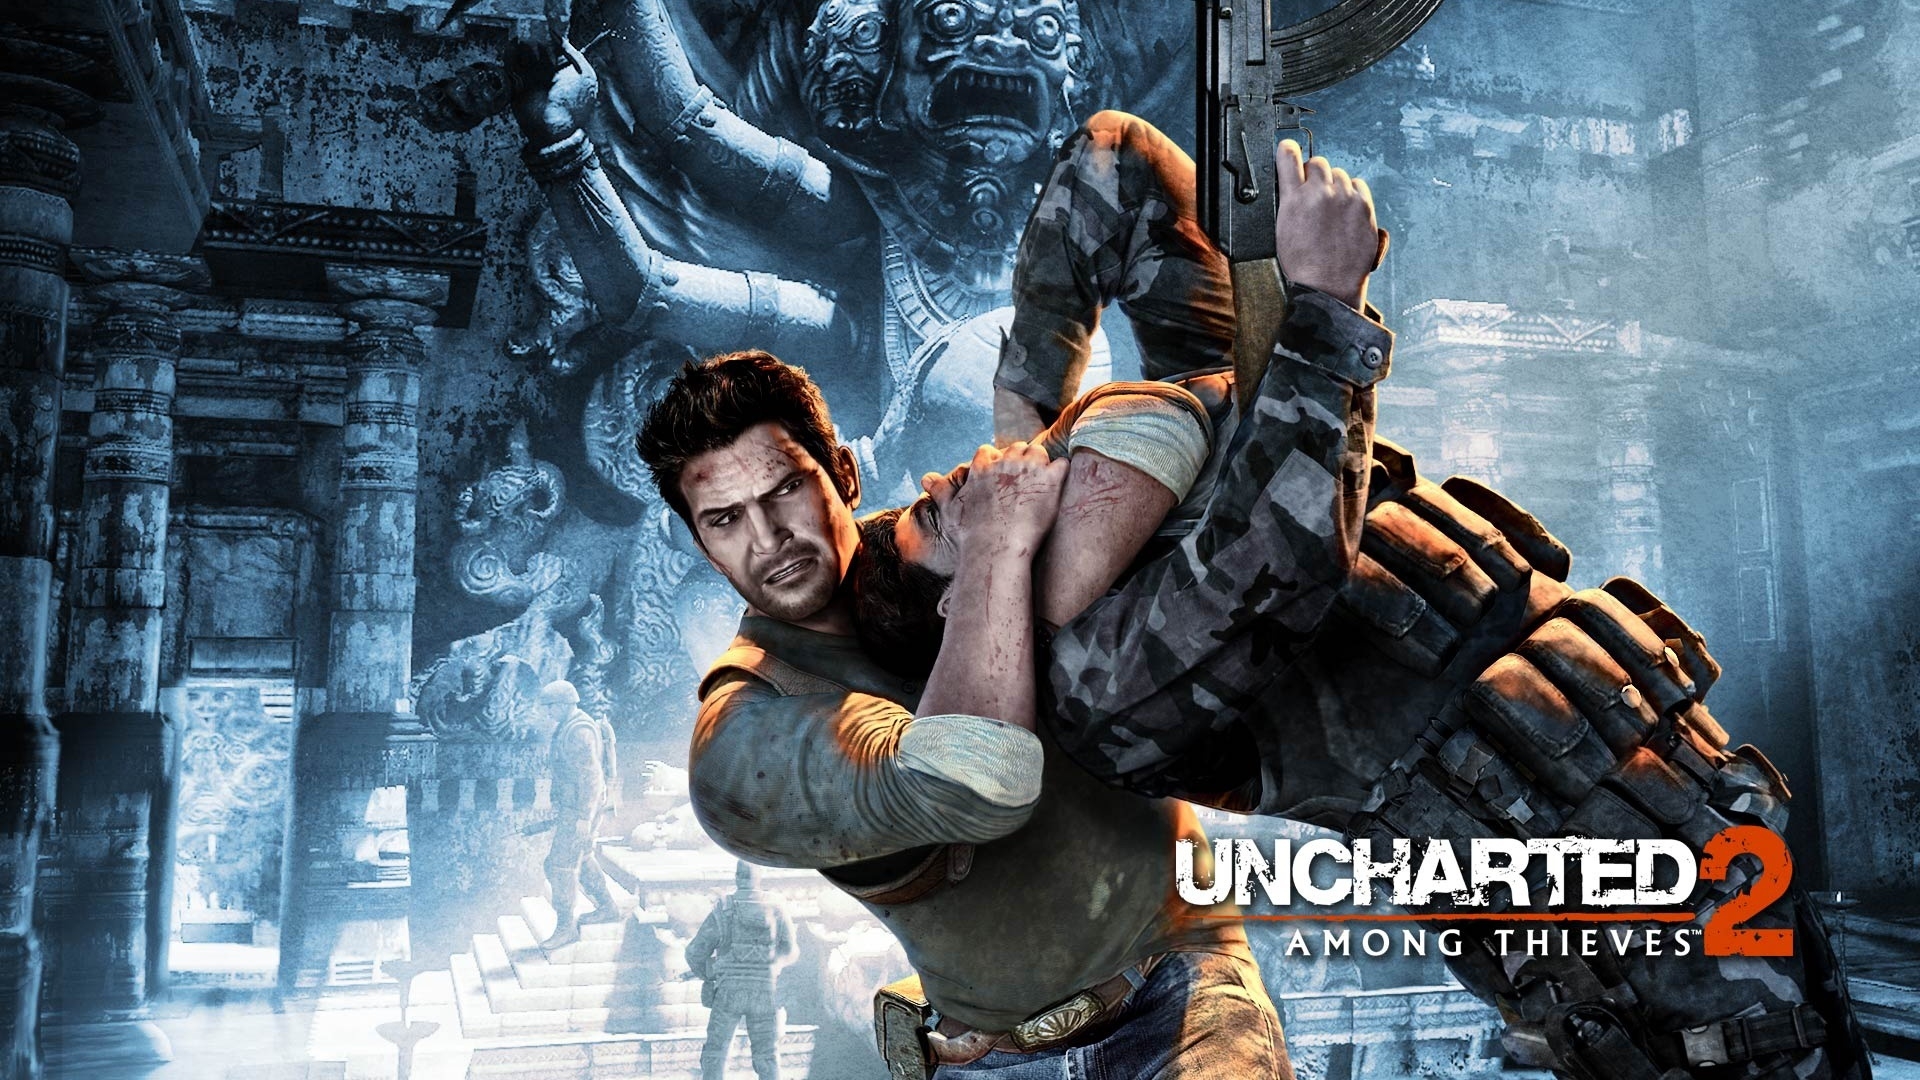 Uncharted 2: Among Thieves for 1920 x 1080 HDTV 1080p resolution